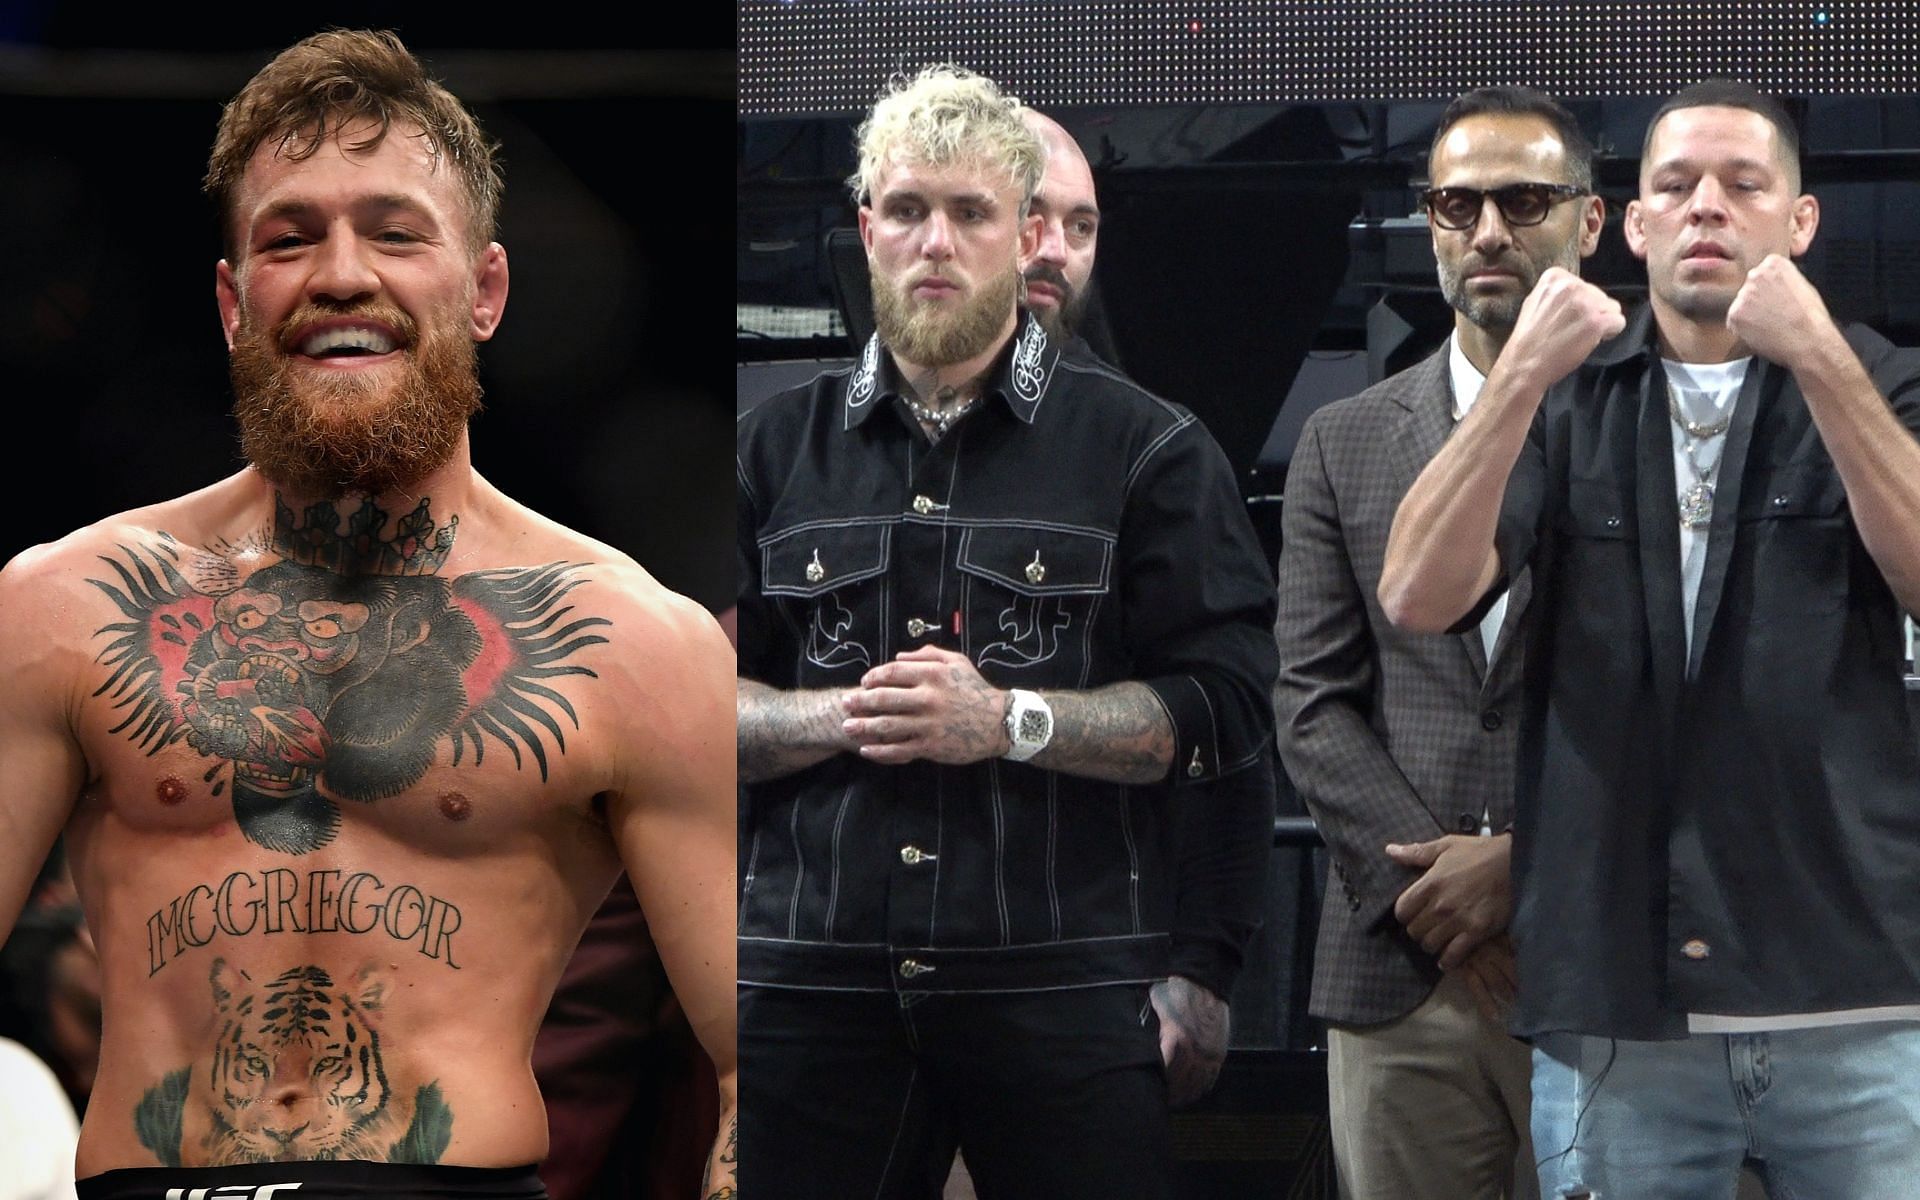 Conor McGregor (left) and Jake Paul vs. Nate Diaz (right) [Image credits: Getty Images and @MMAMania on Twitter]